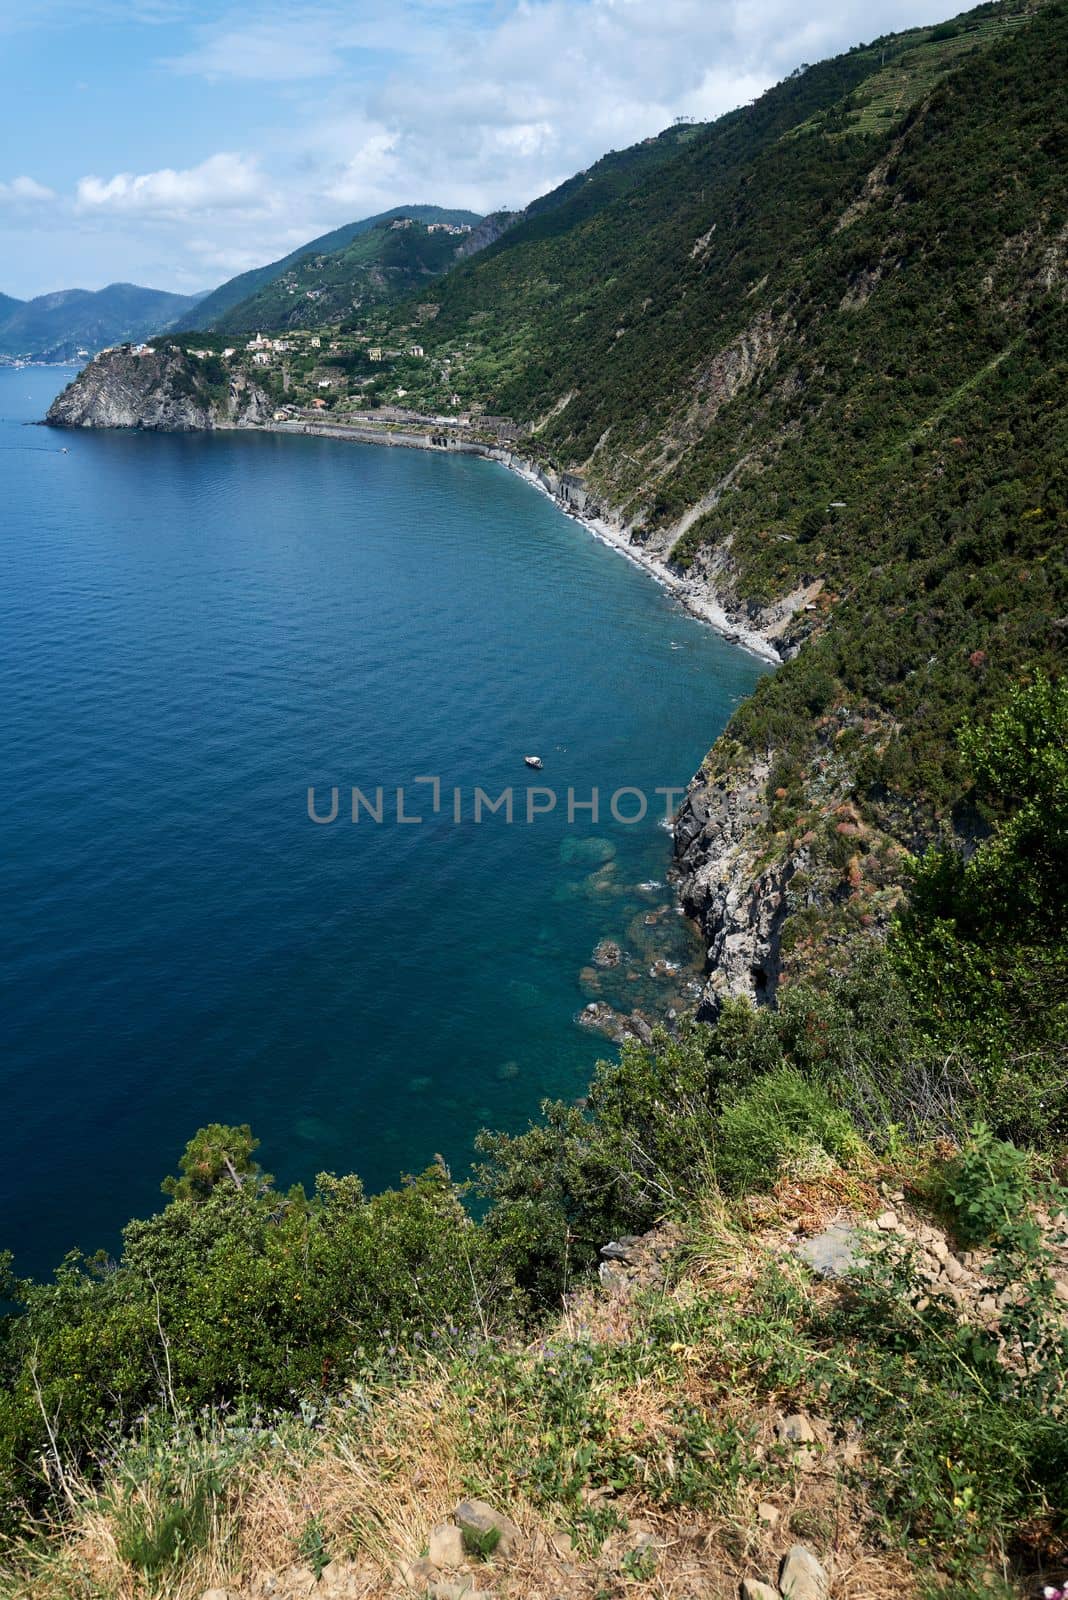 Typical landscape in the Cinque Terre region by Pammy1140